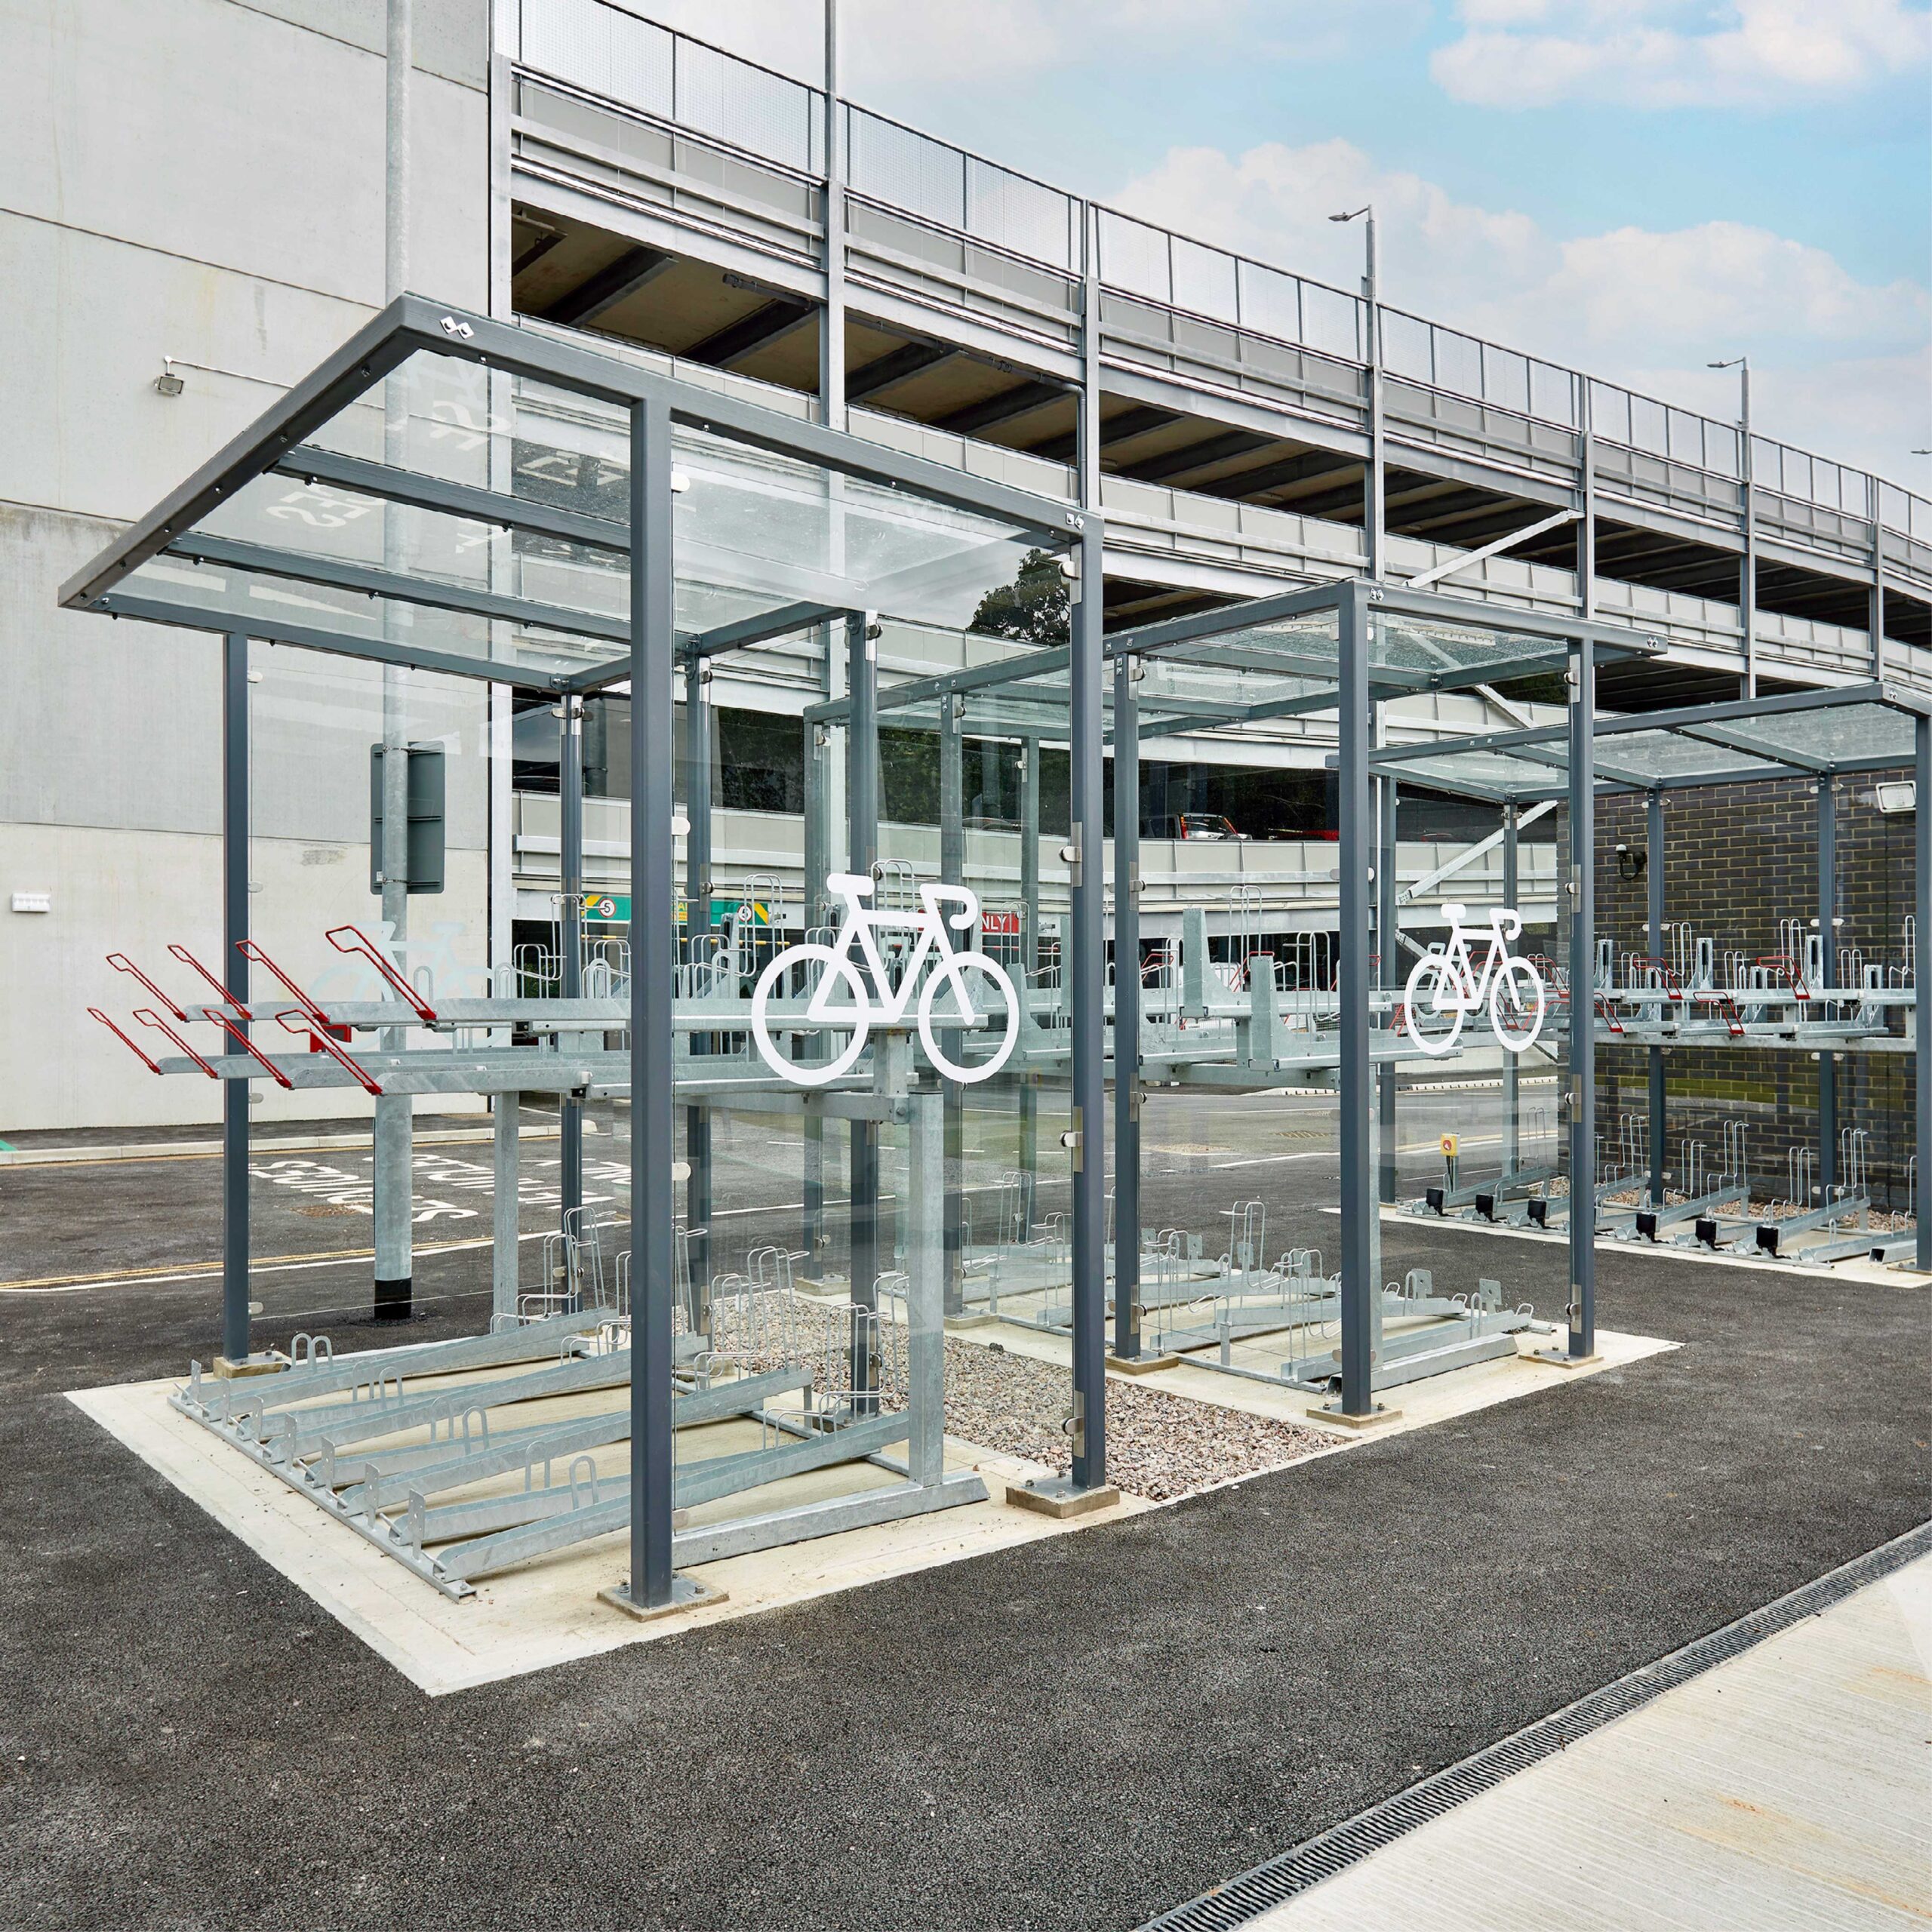 Modern outdoor bicycle parking facility with covered racks and glass windbreaks, designed for secure bike storage, located near a building.